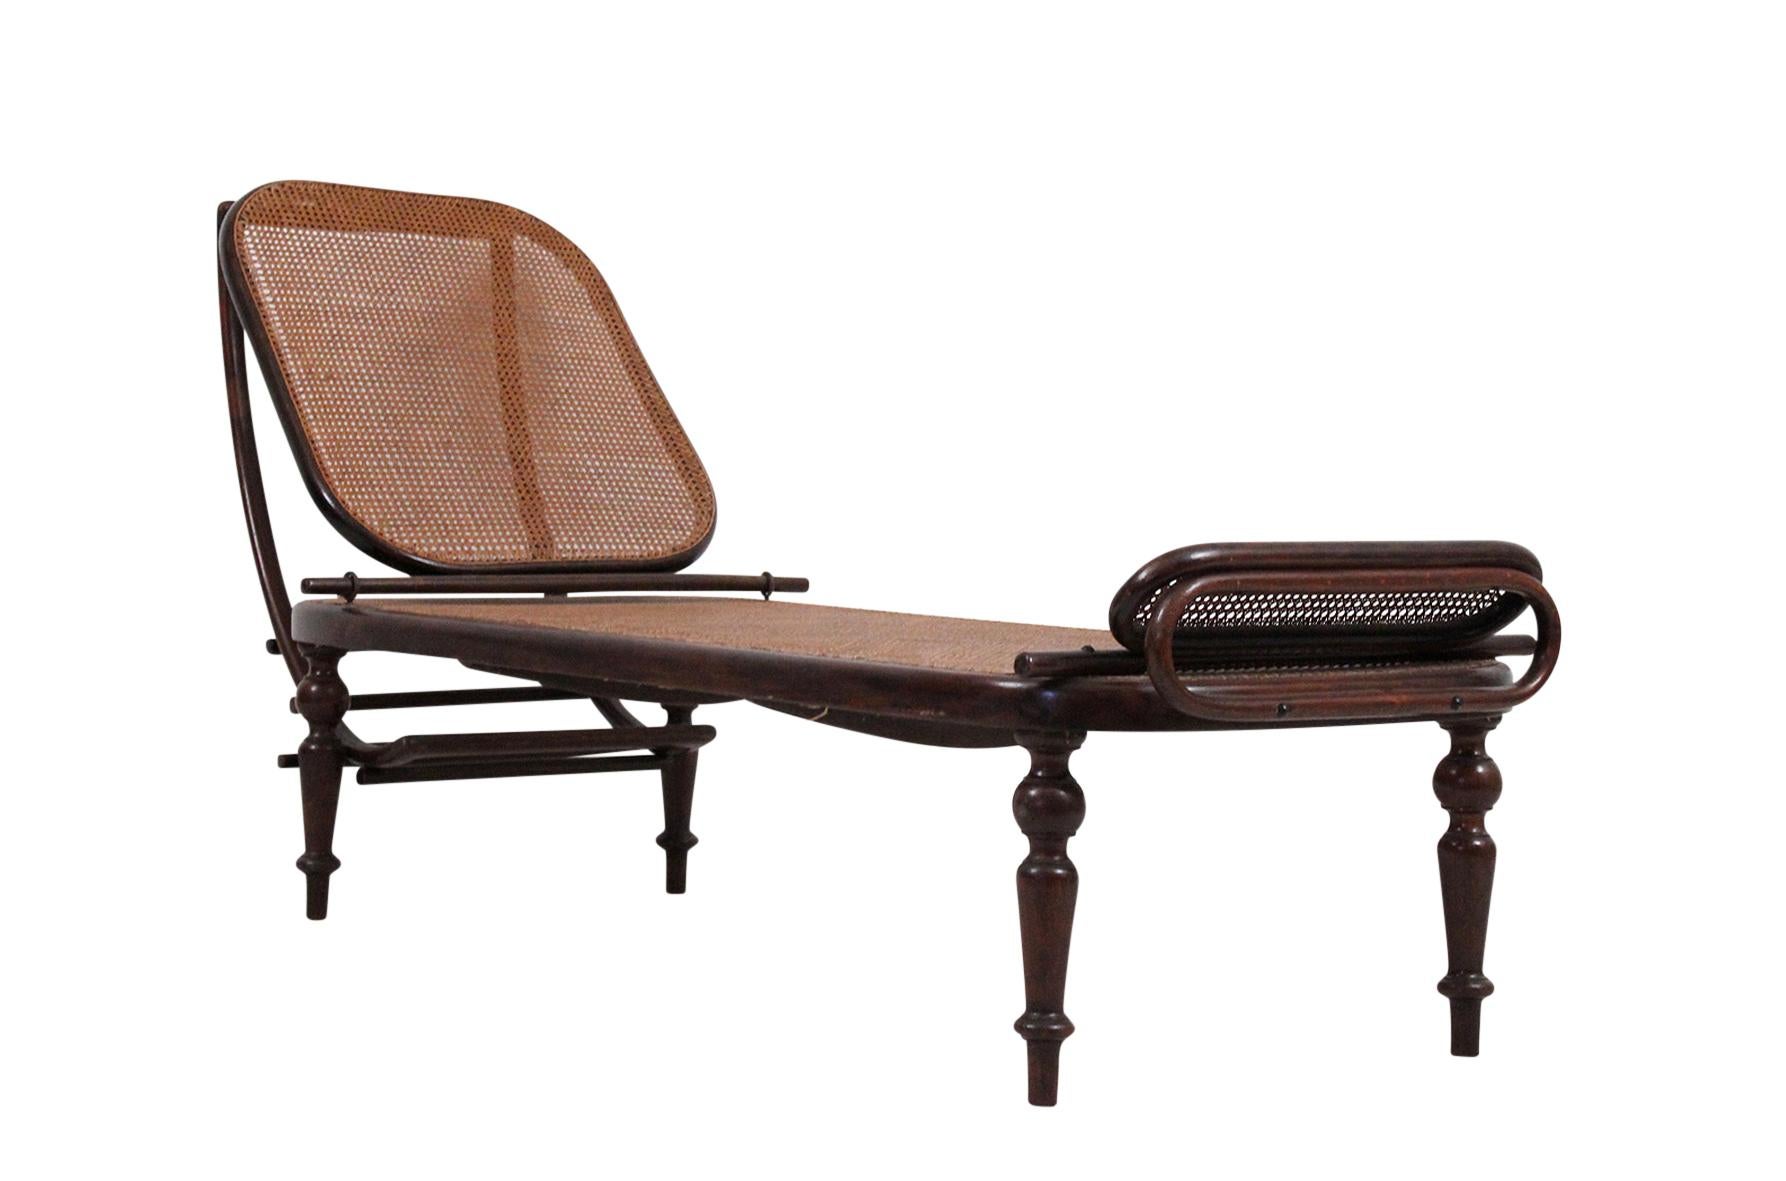 Adjustable chaise lounge in stained beechwood. Manufactured by Gebrüder Thonet. Vienna, Austria, circa late 19th-early 20th century. This model was in production between 1887-1910. All original condition. Signed with Thonet brand to underside.
 